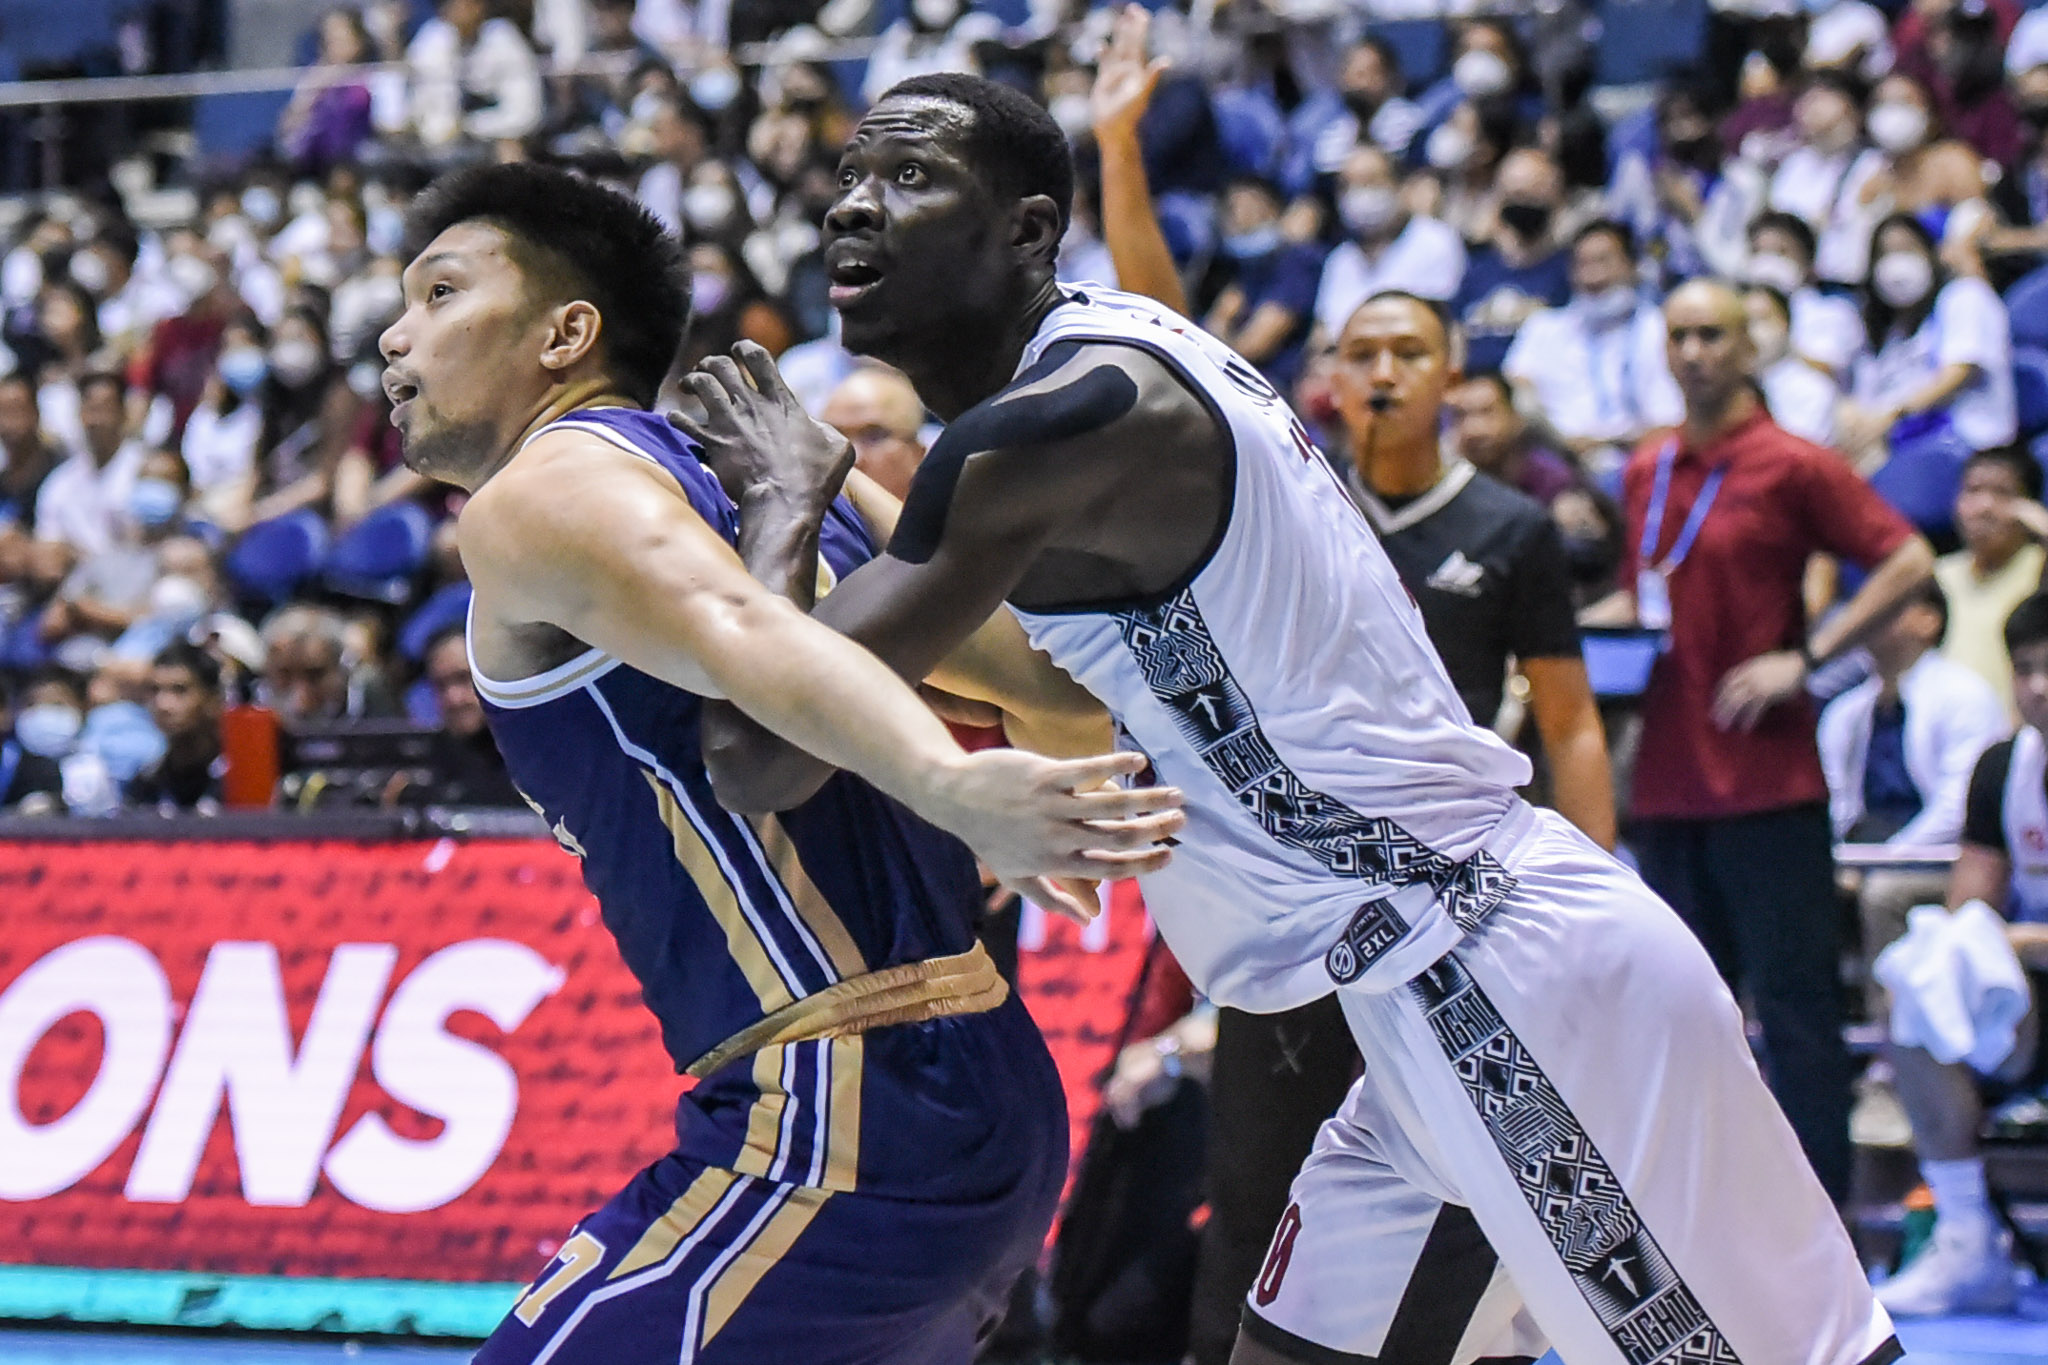 UAAP-85-MBB-F4-UP-vs.-NU-Malick-Diouf-8664 Seeing Tamayo go down fires up UP, says Abadiano Basketball News PBA  - philippine sports news